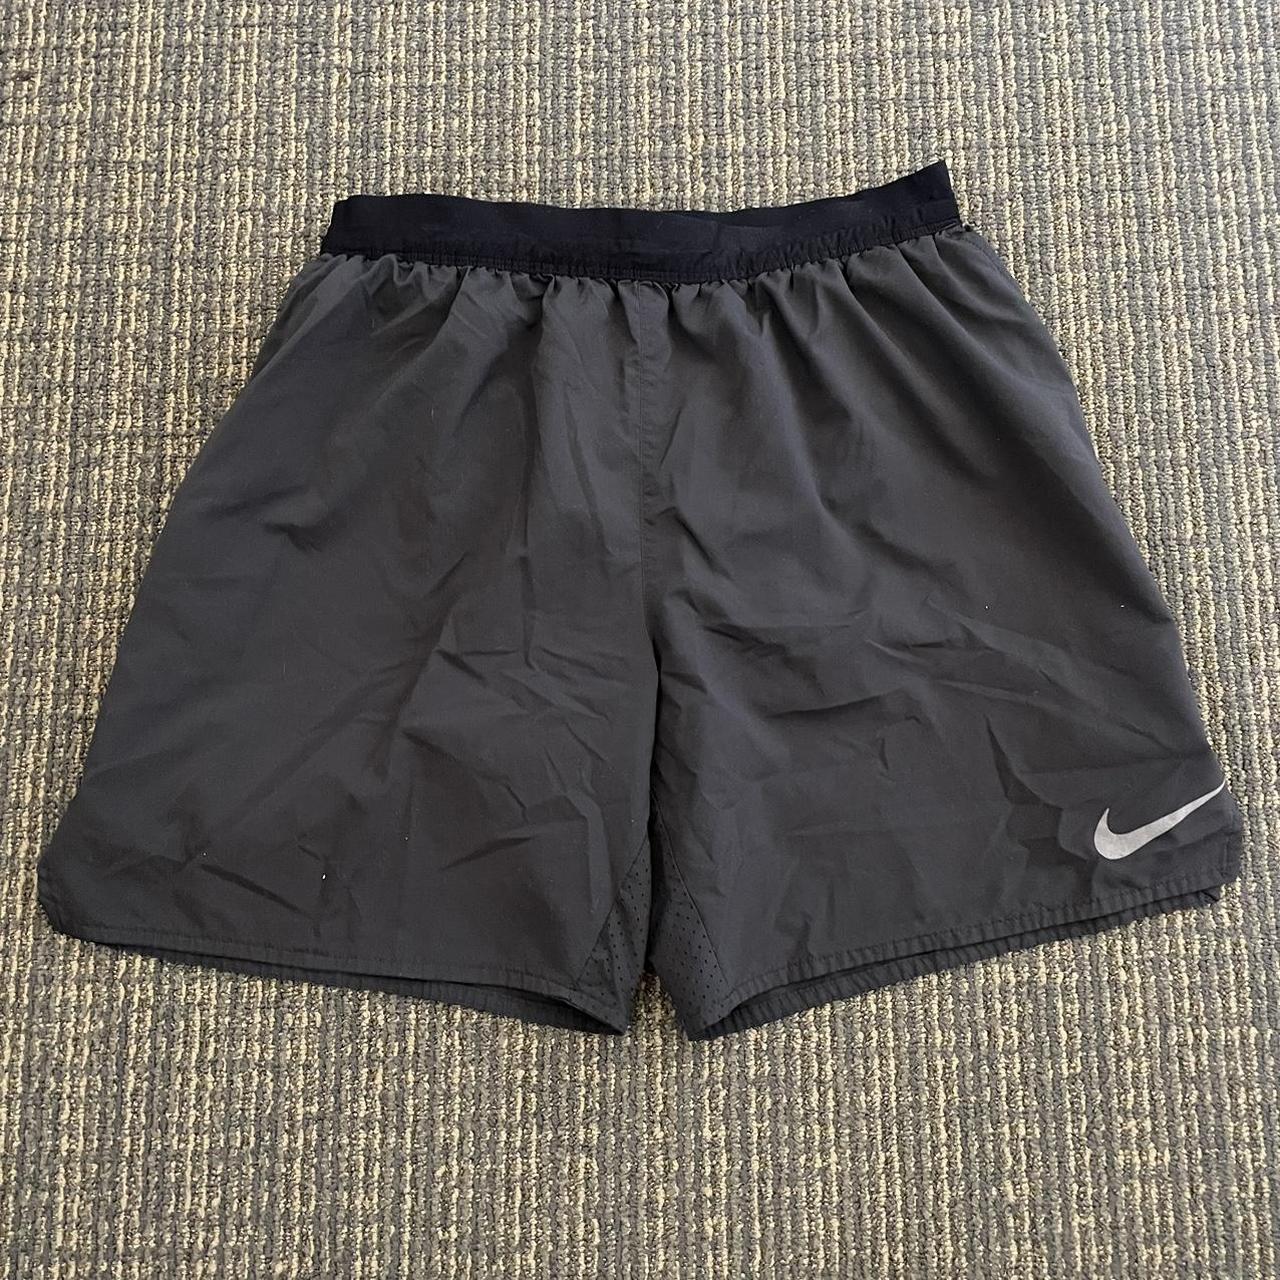 Workout shorts in size large #Workout #Running - Depop